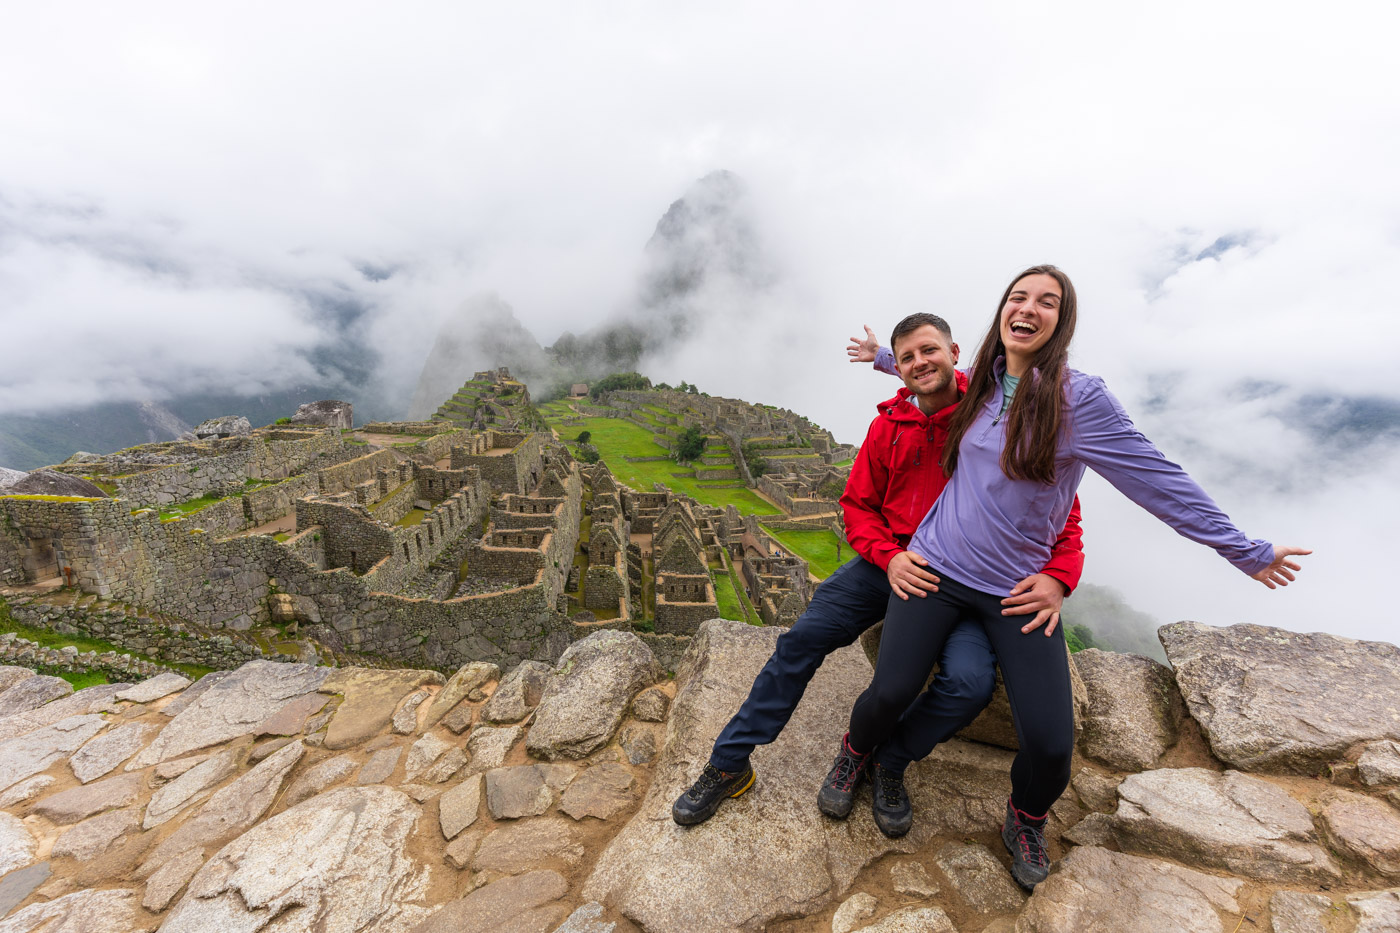 Ryan and Sara wearing colorful hiking gear and in a hugging pose sitting on a rock in front of a full view of Machu Picchu in Peru.